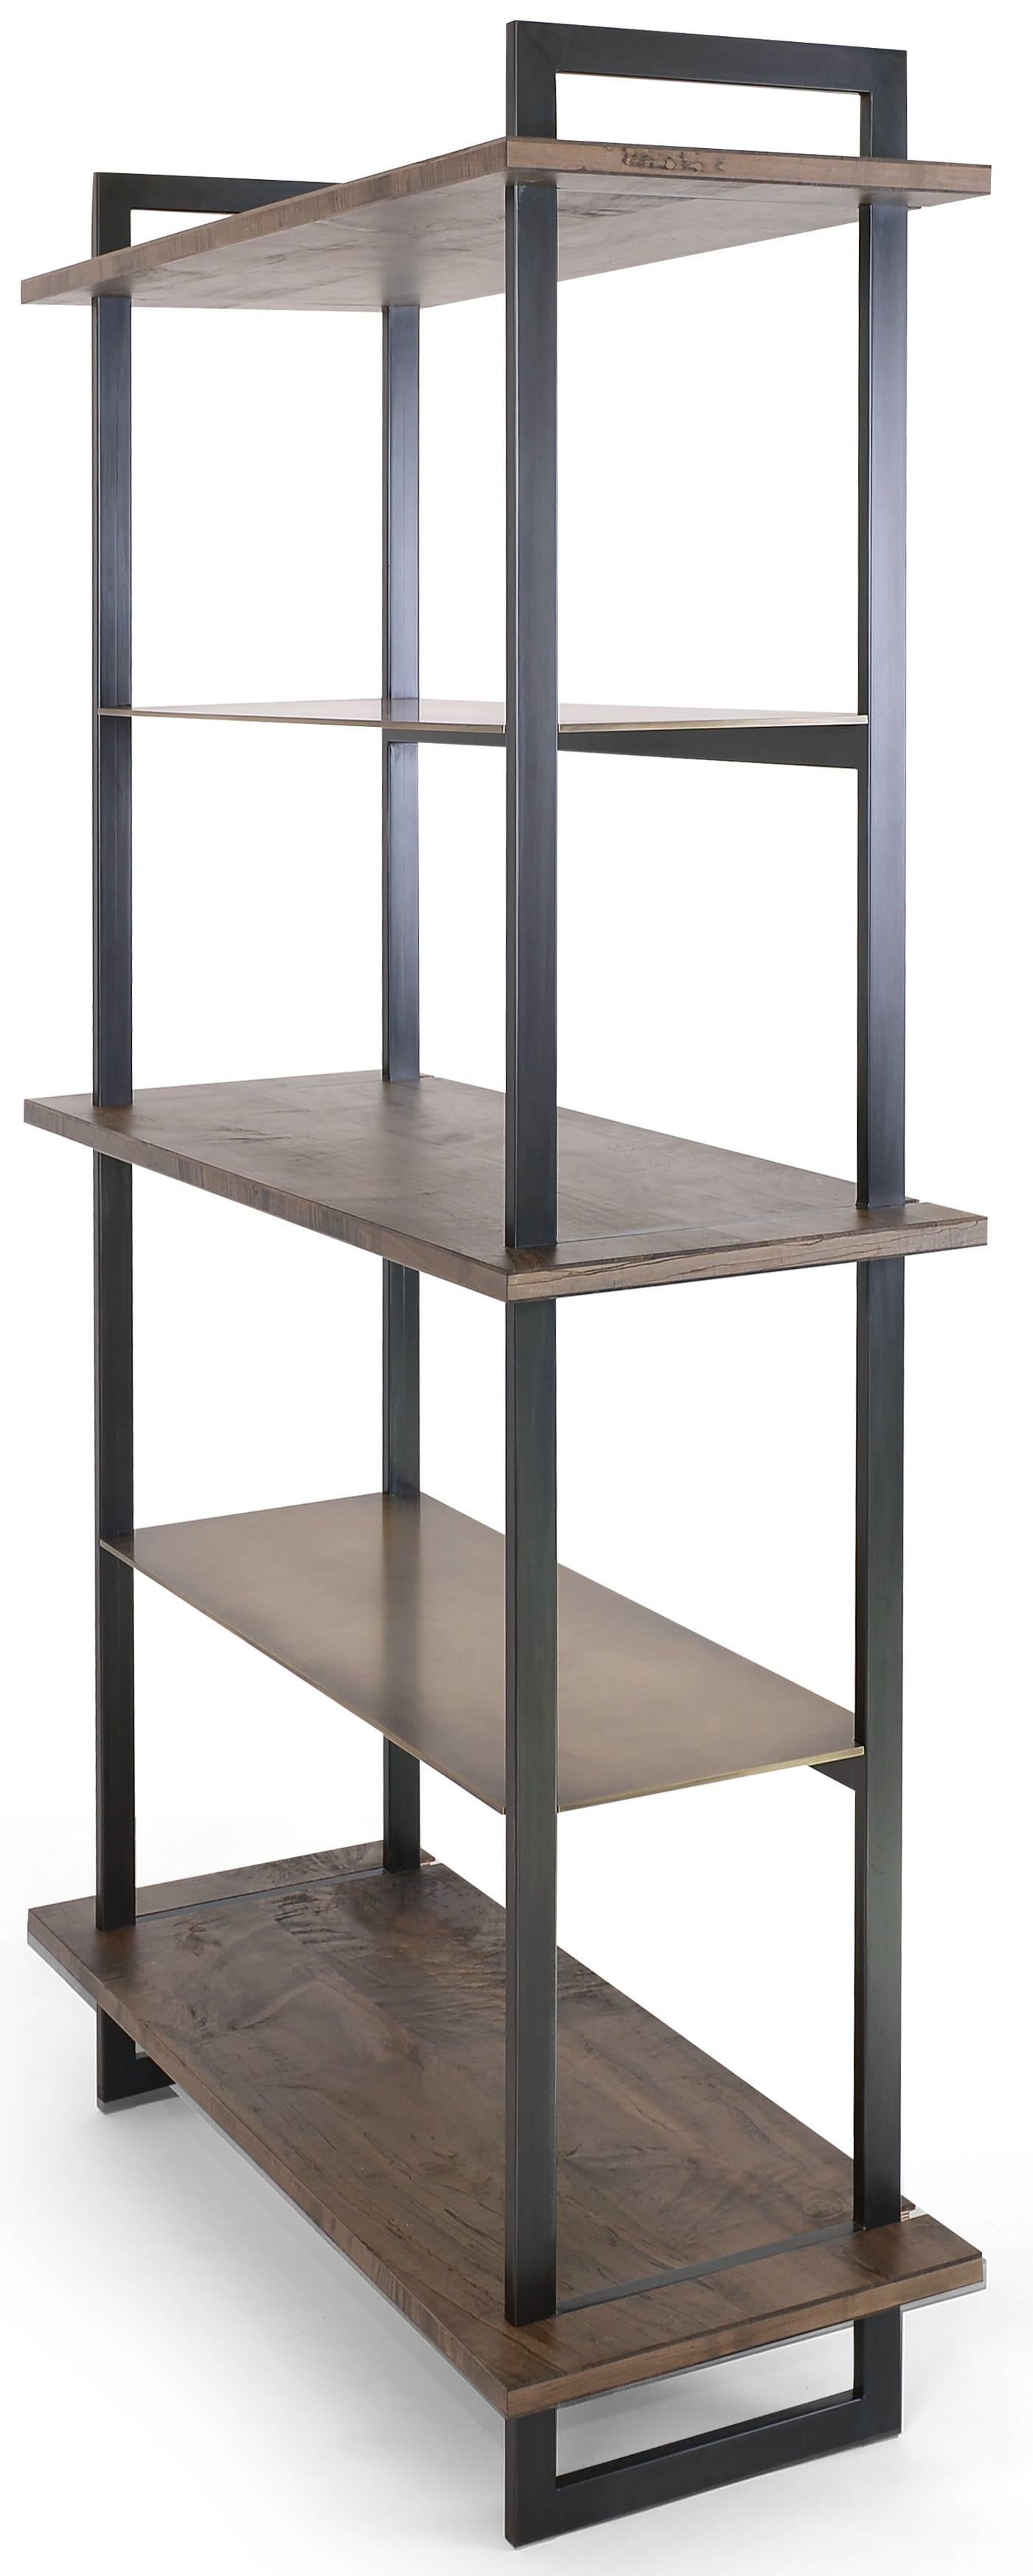 The elegant and striking Gotham bookcase features alternating oxidized Ambrosia maple and burnished bronze shelves with a blackened steel frame.

One available in-stock:
W 42 in. / D 18 in. / H 84 in.

Standard size options - 10-12 week lead